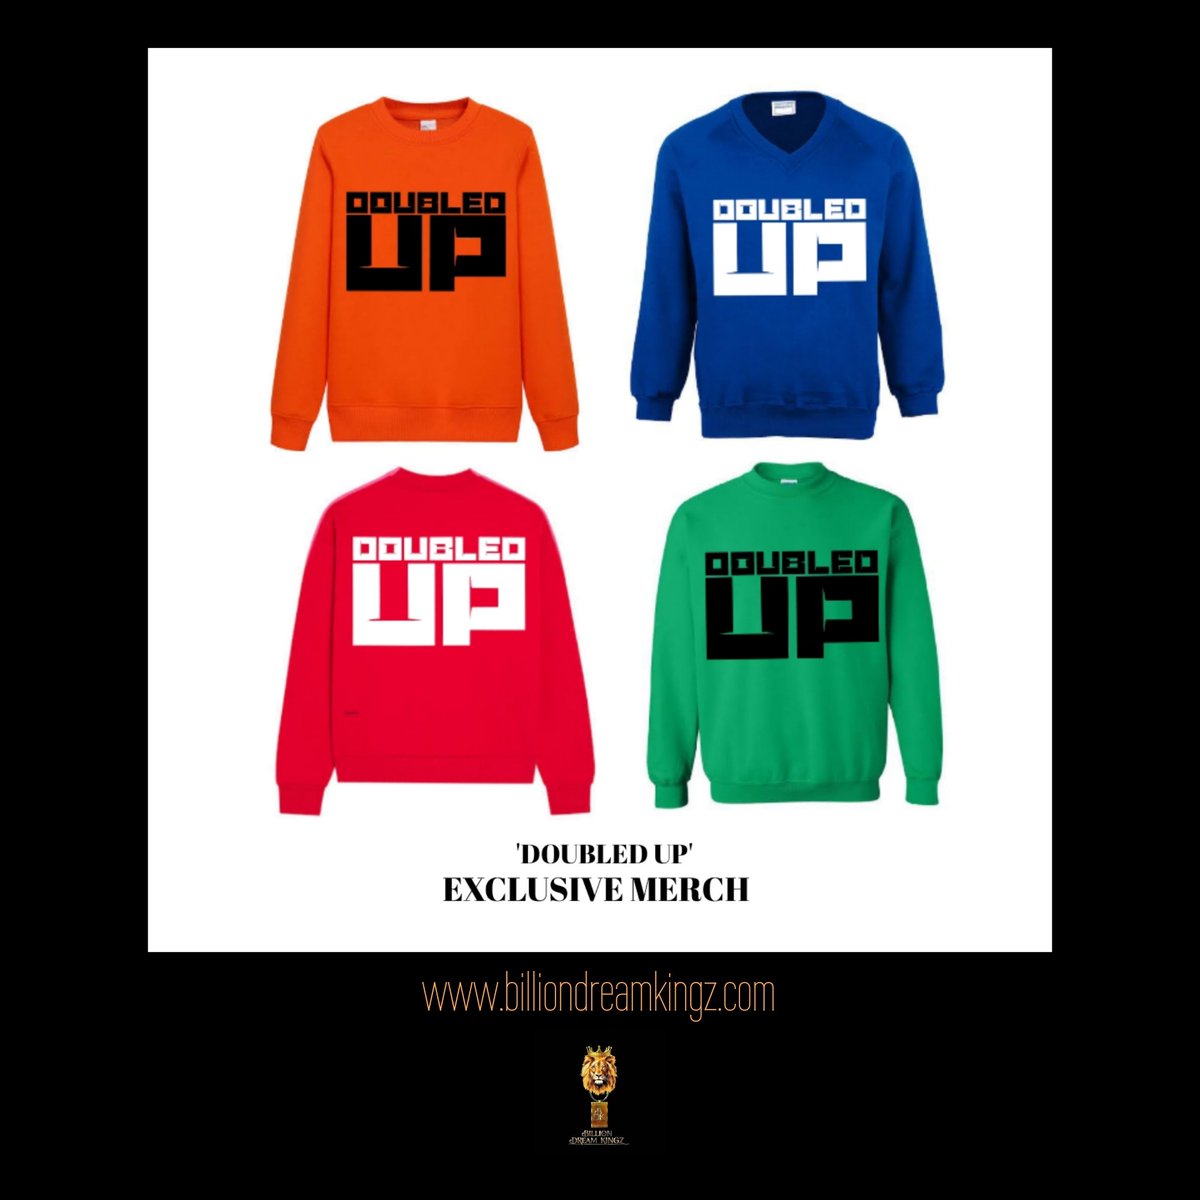 The #DoubledUp Exclusive Anniversary Merches are still available and selling #FanLuv Go #ShopNow 

Cc: @bdk_kingz